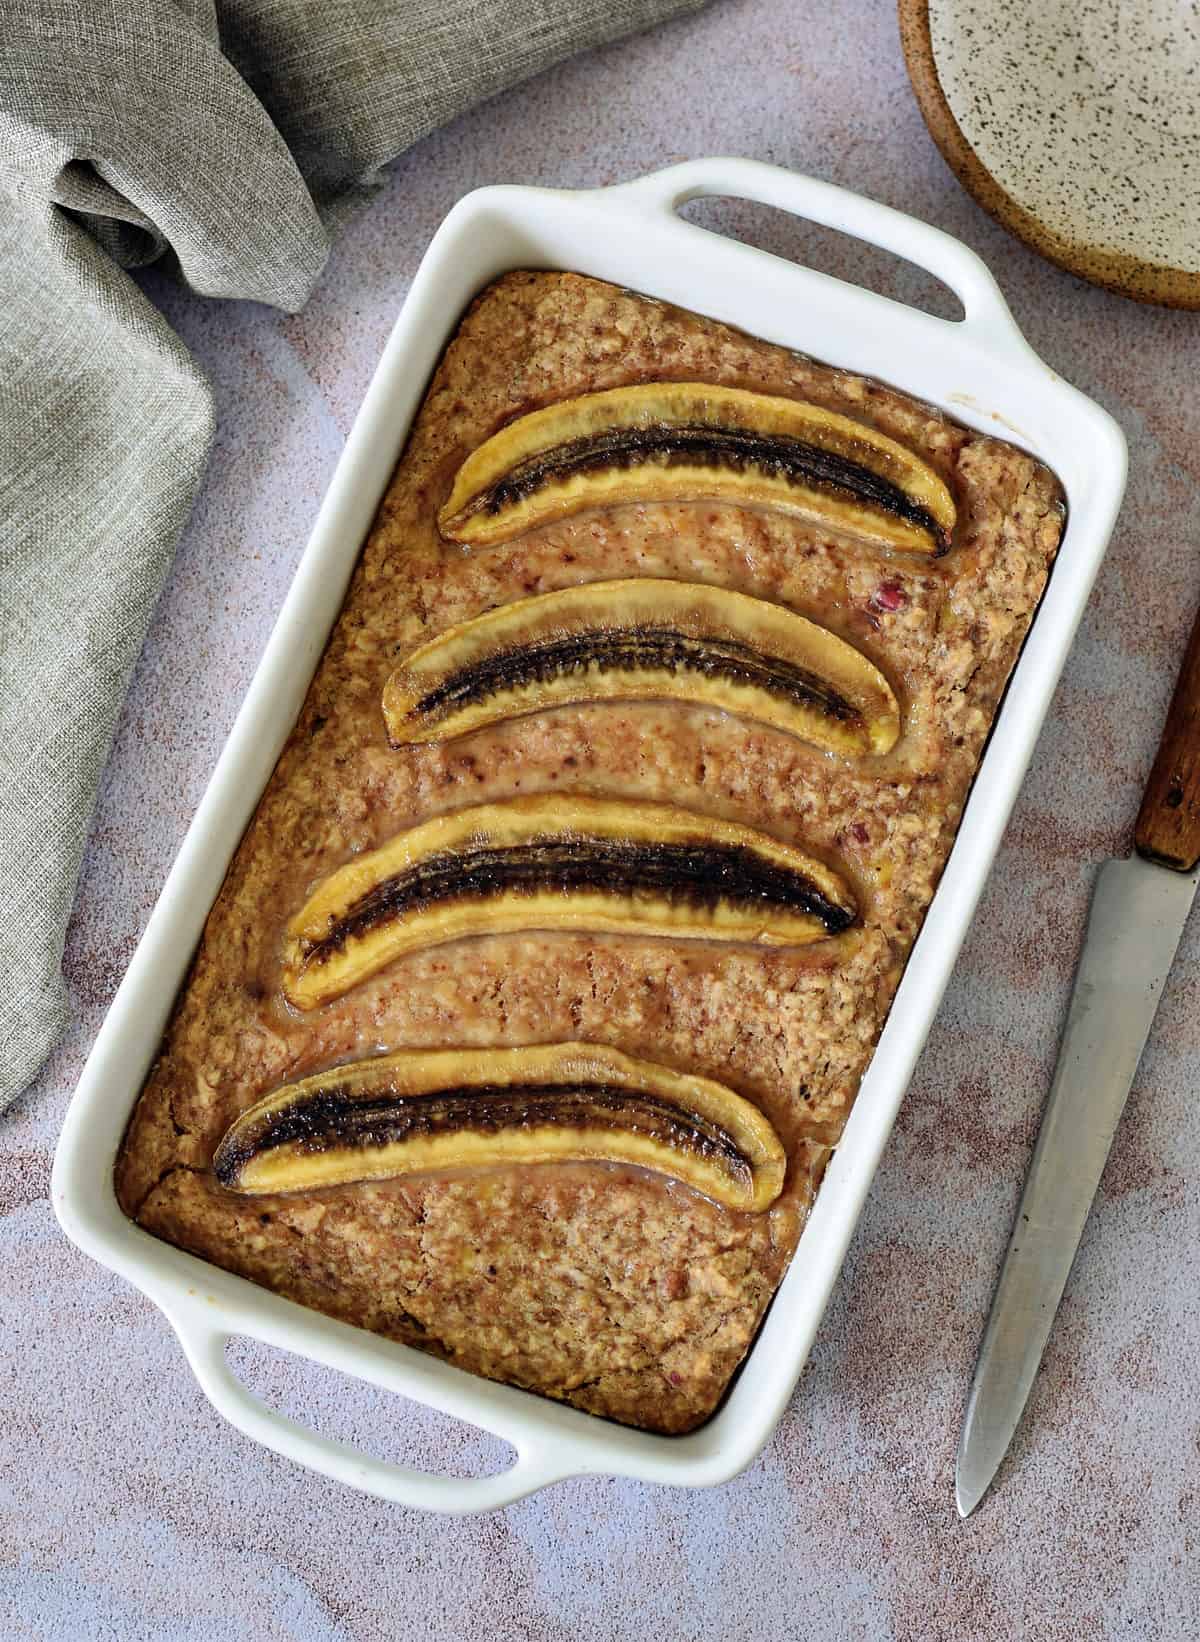 oat bake with banana slices in white pan